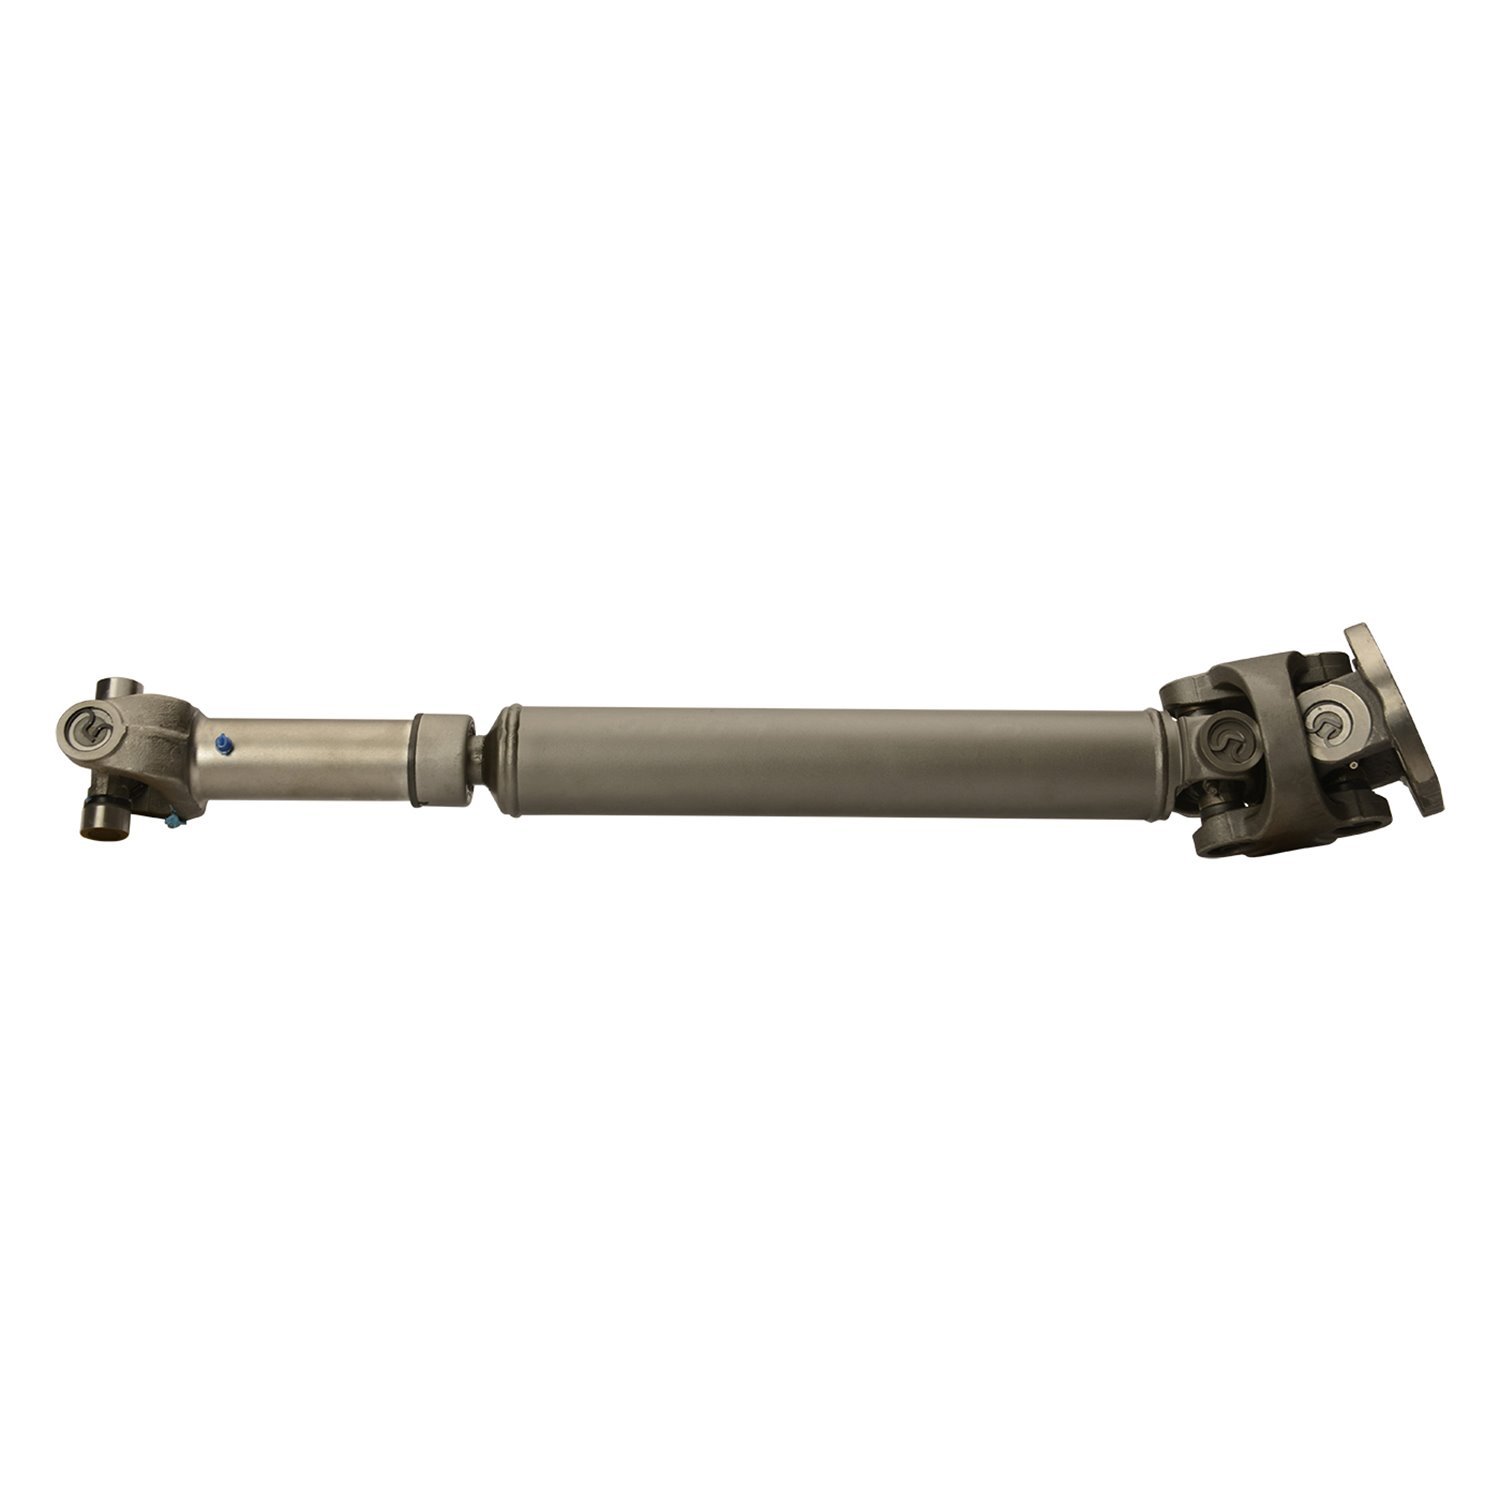 USA Standard ZDS9546 Front Driveshaft, For F350 & Excursion, 37-3/4 in. Center-To-Center